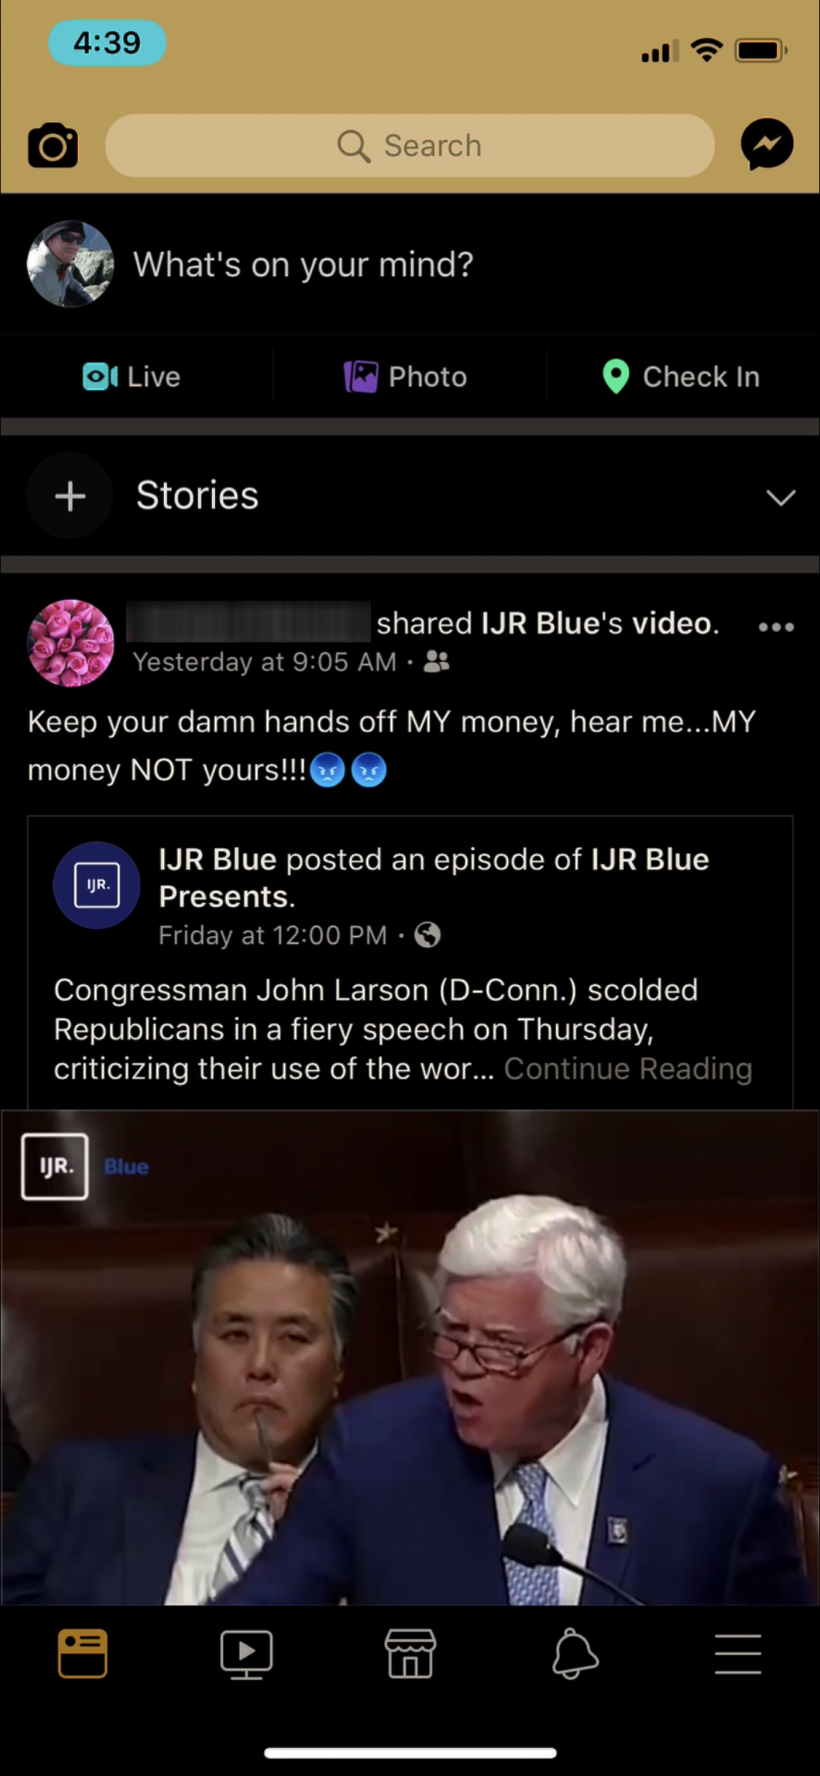 How to turn on dark mode on Facebook on iPhone and iPad.